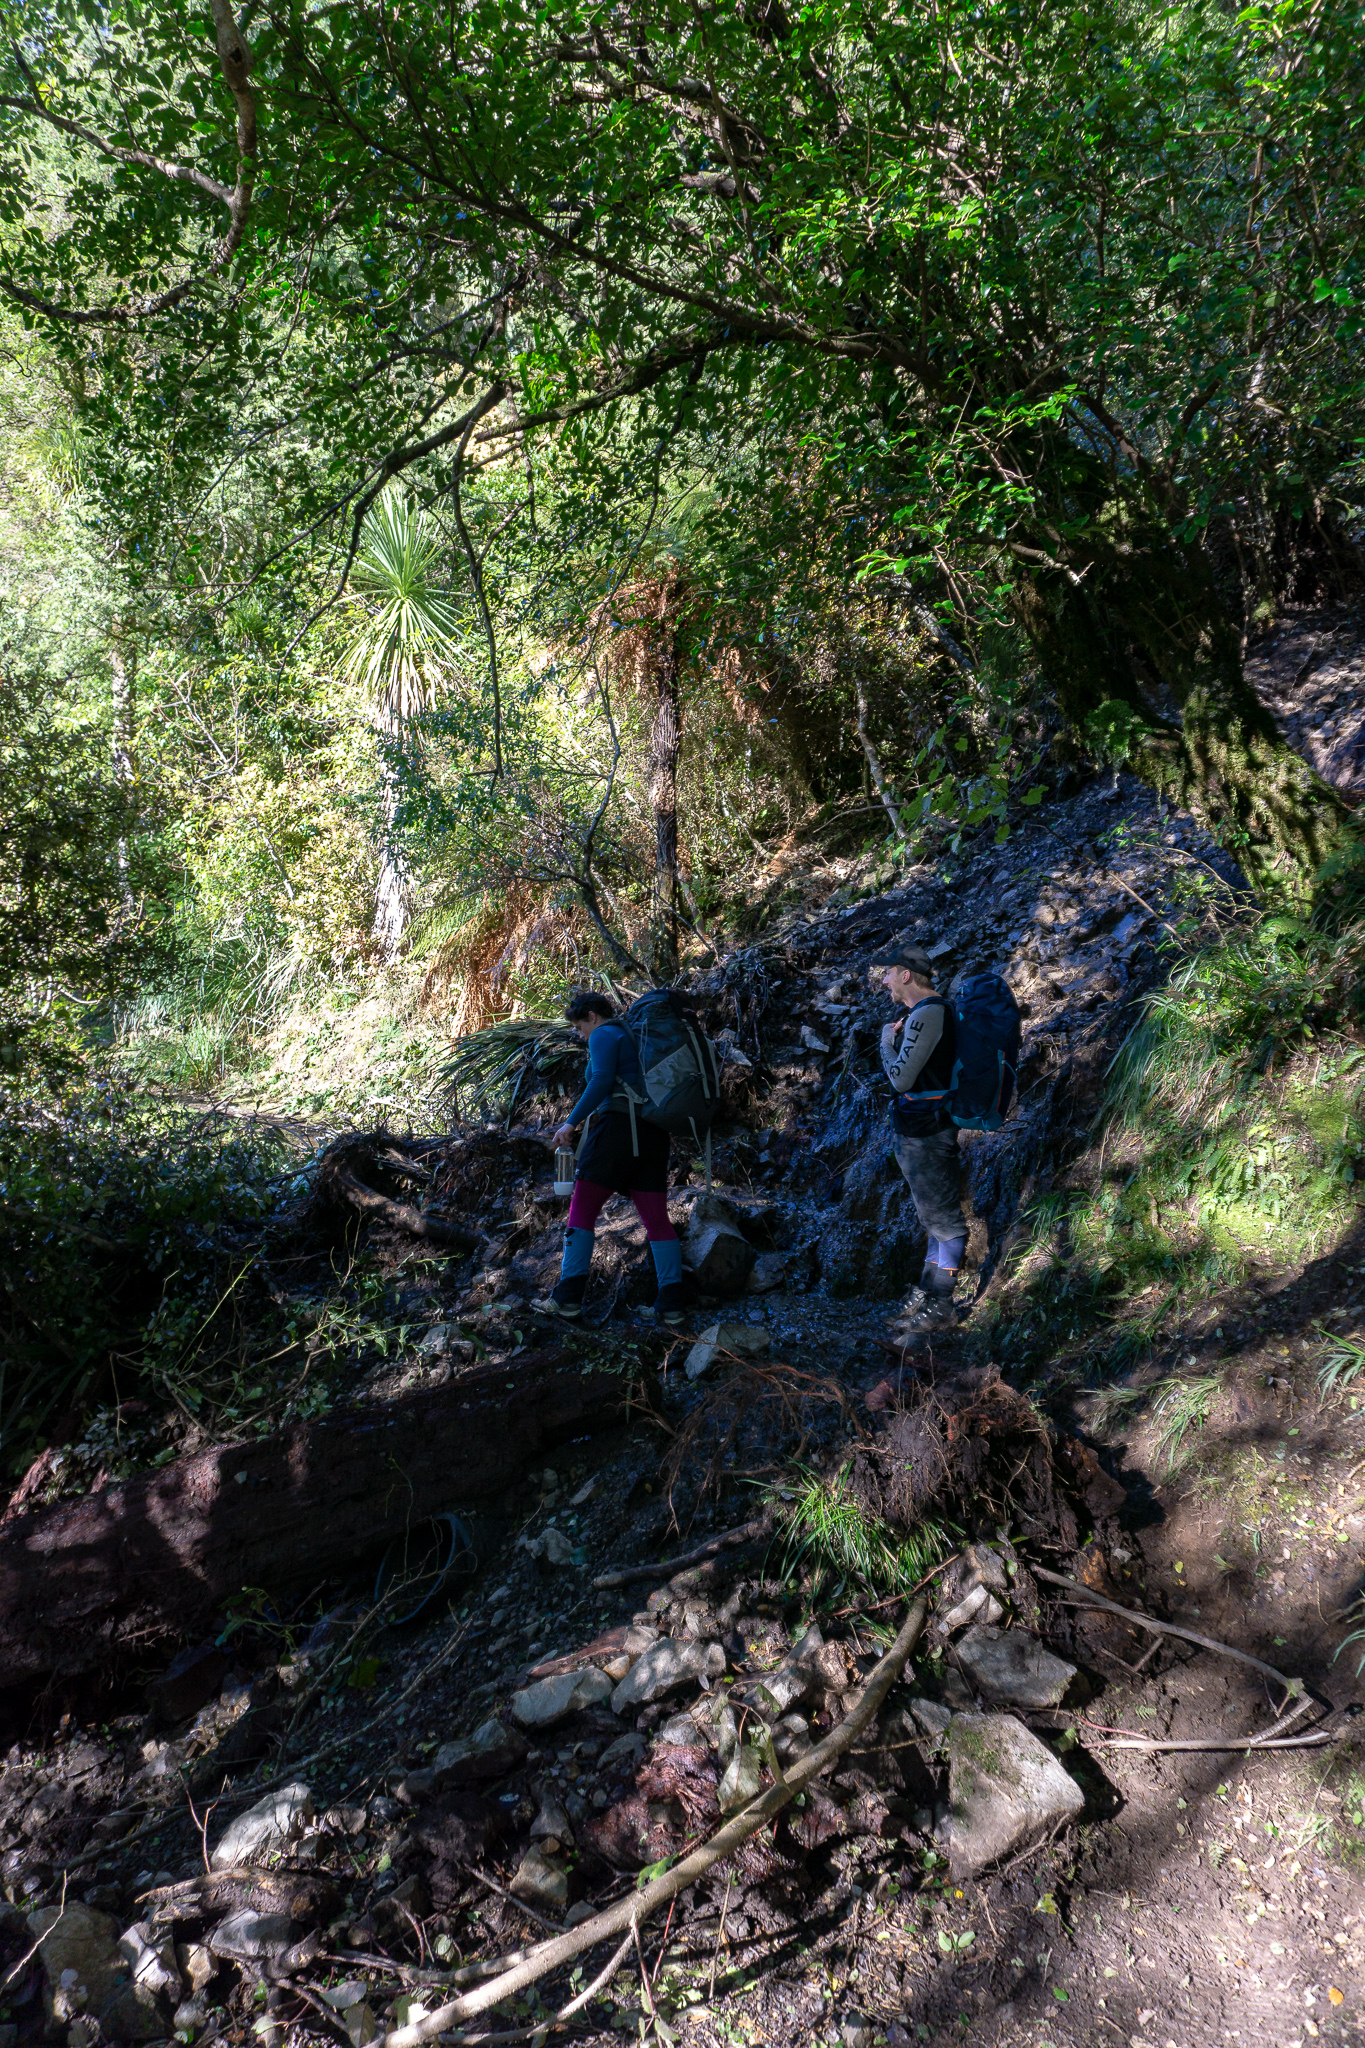 Two trampers on Rangiwahia track negotiating a small slip of mud, rocks and branches across the trail